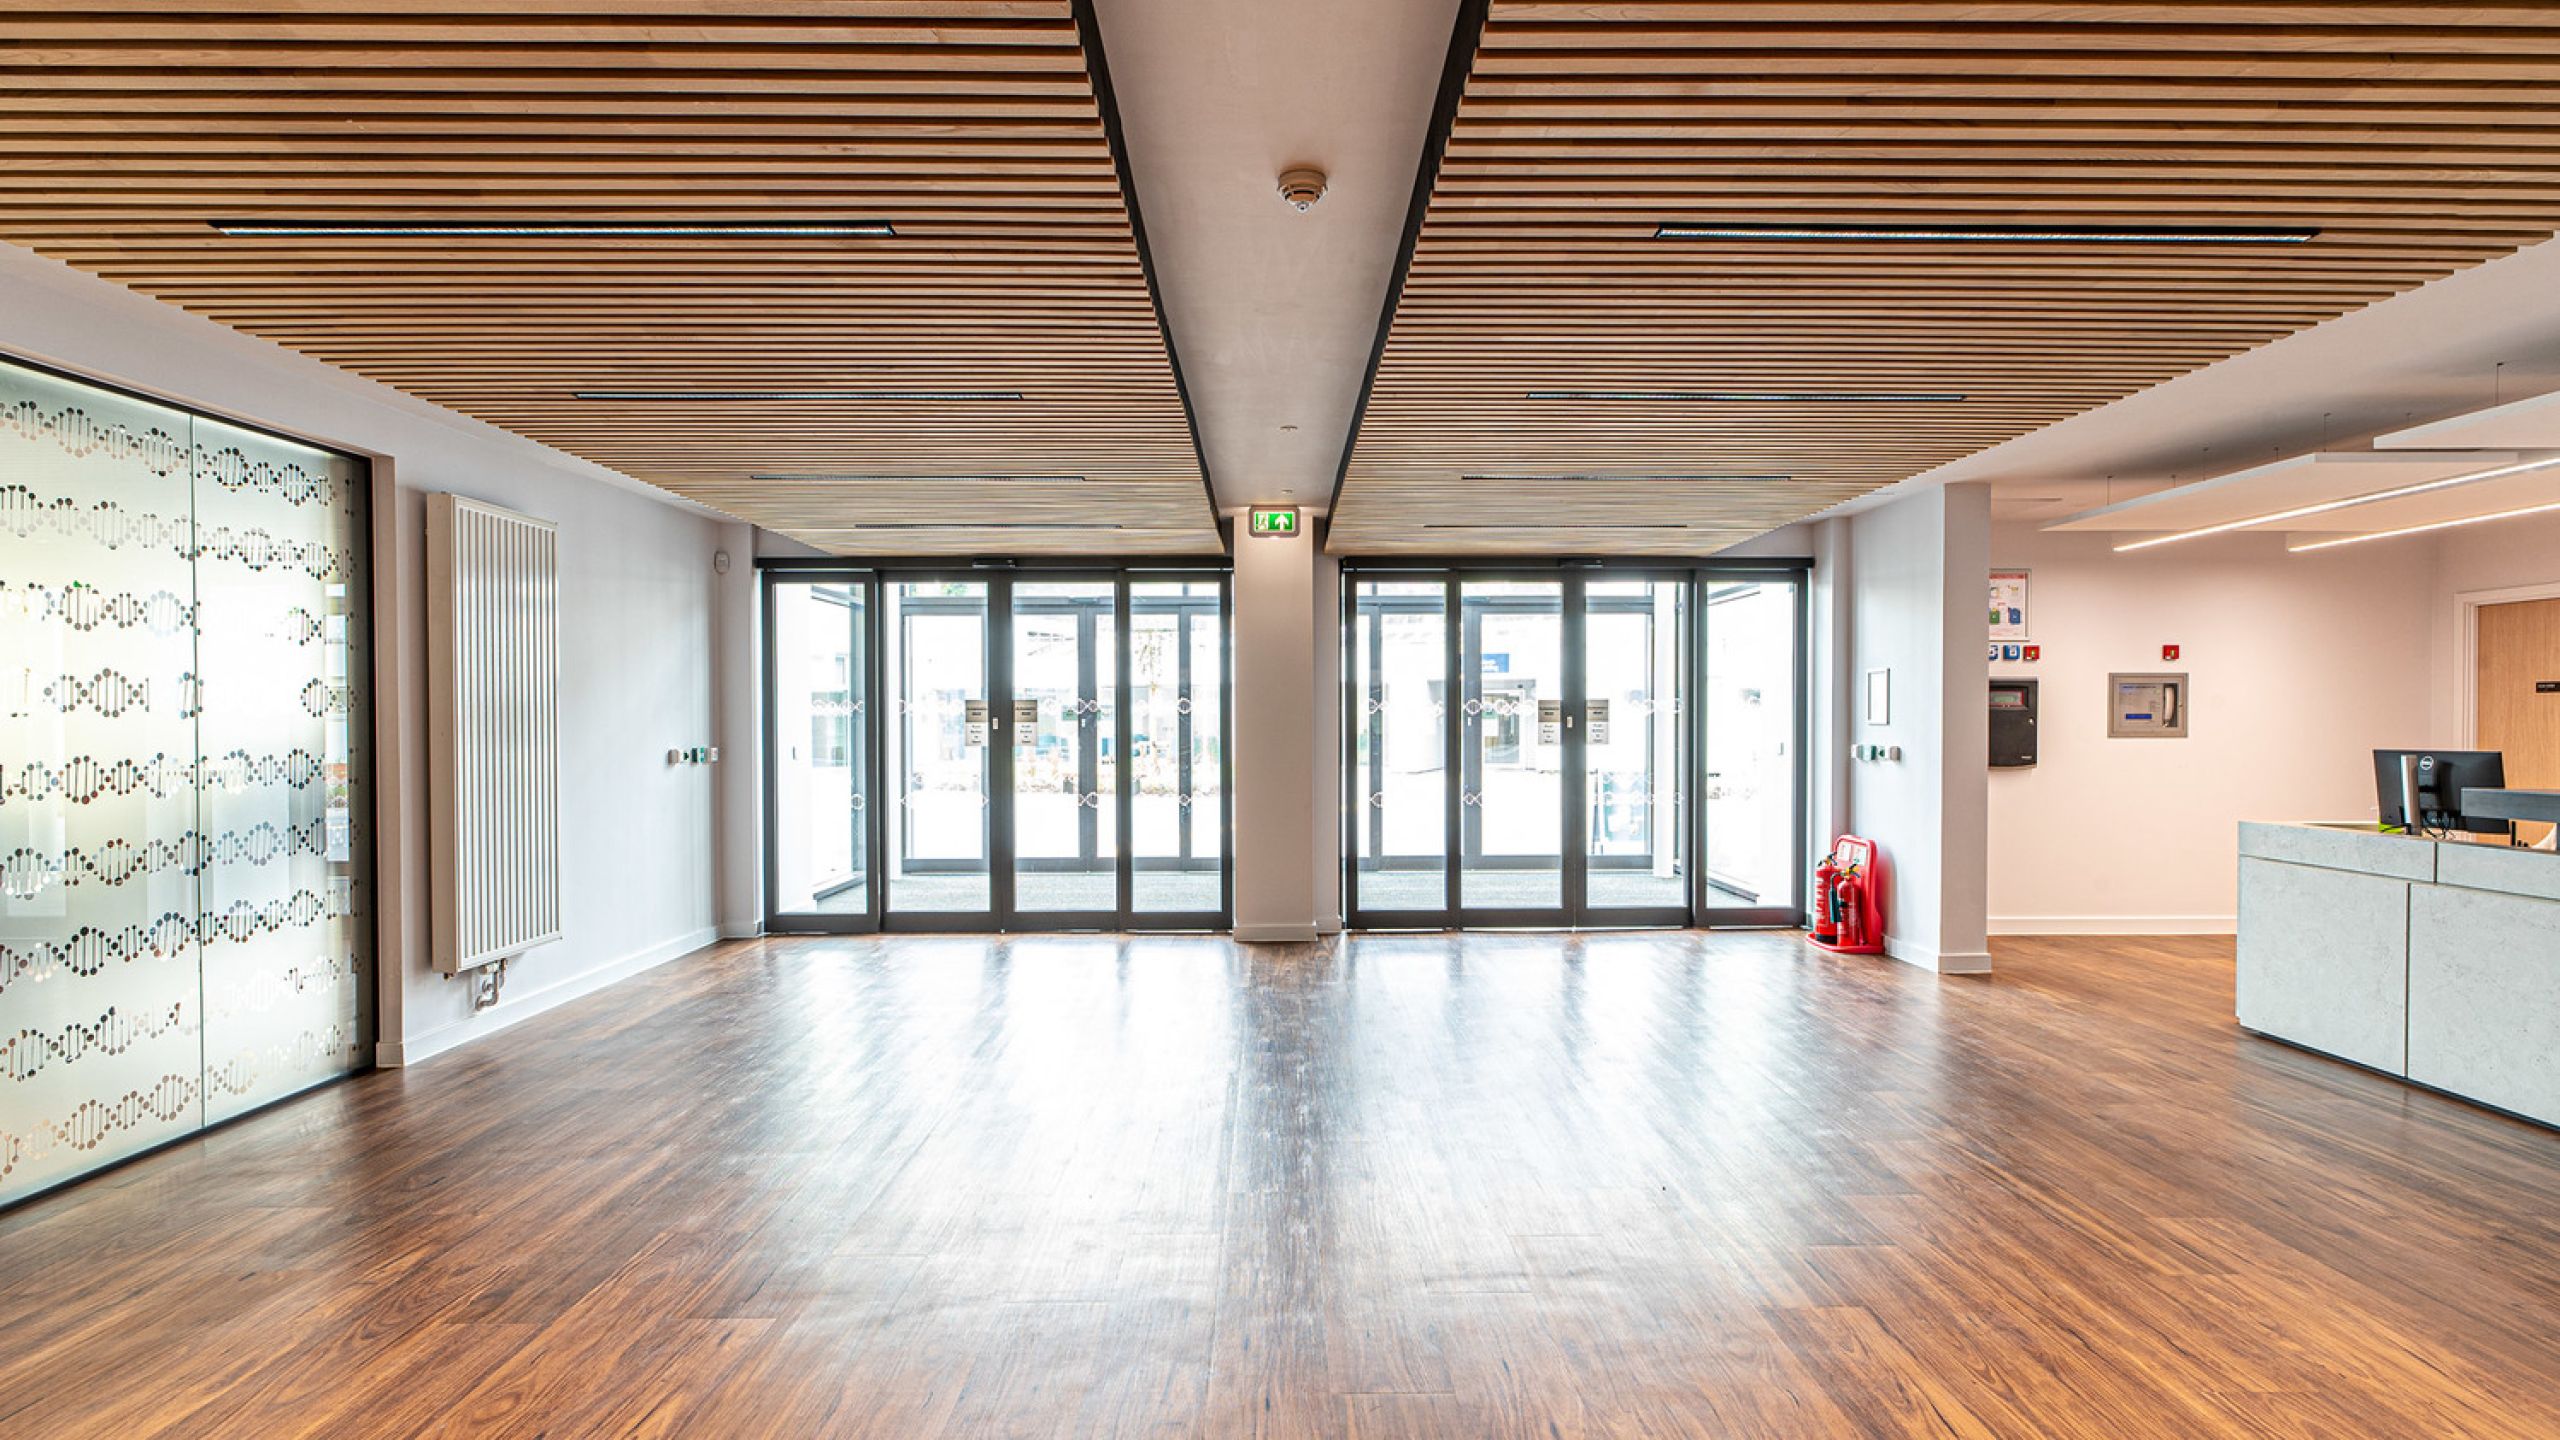 BCL timber slat ceilings at Berrows House, University of Worcester